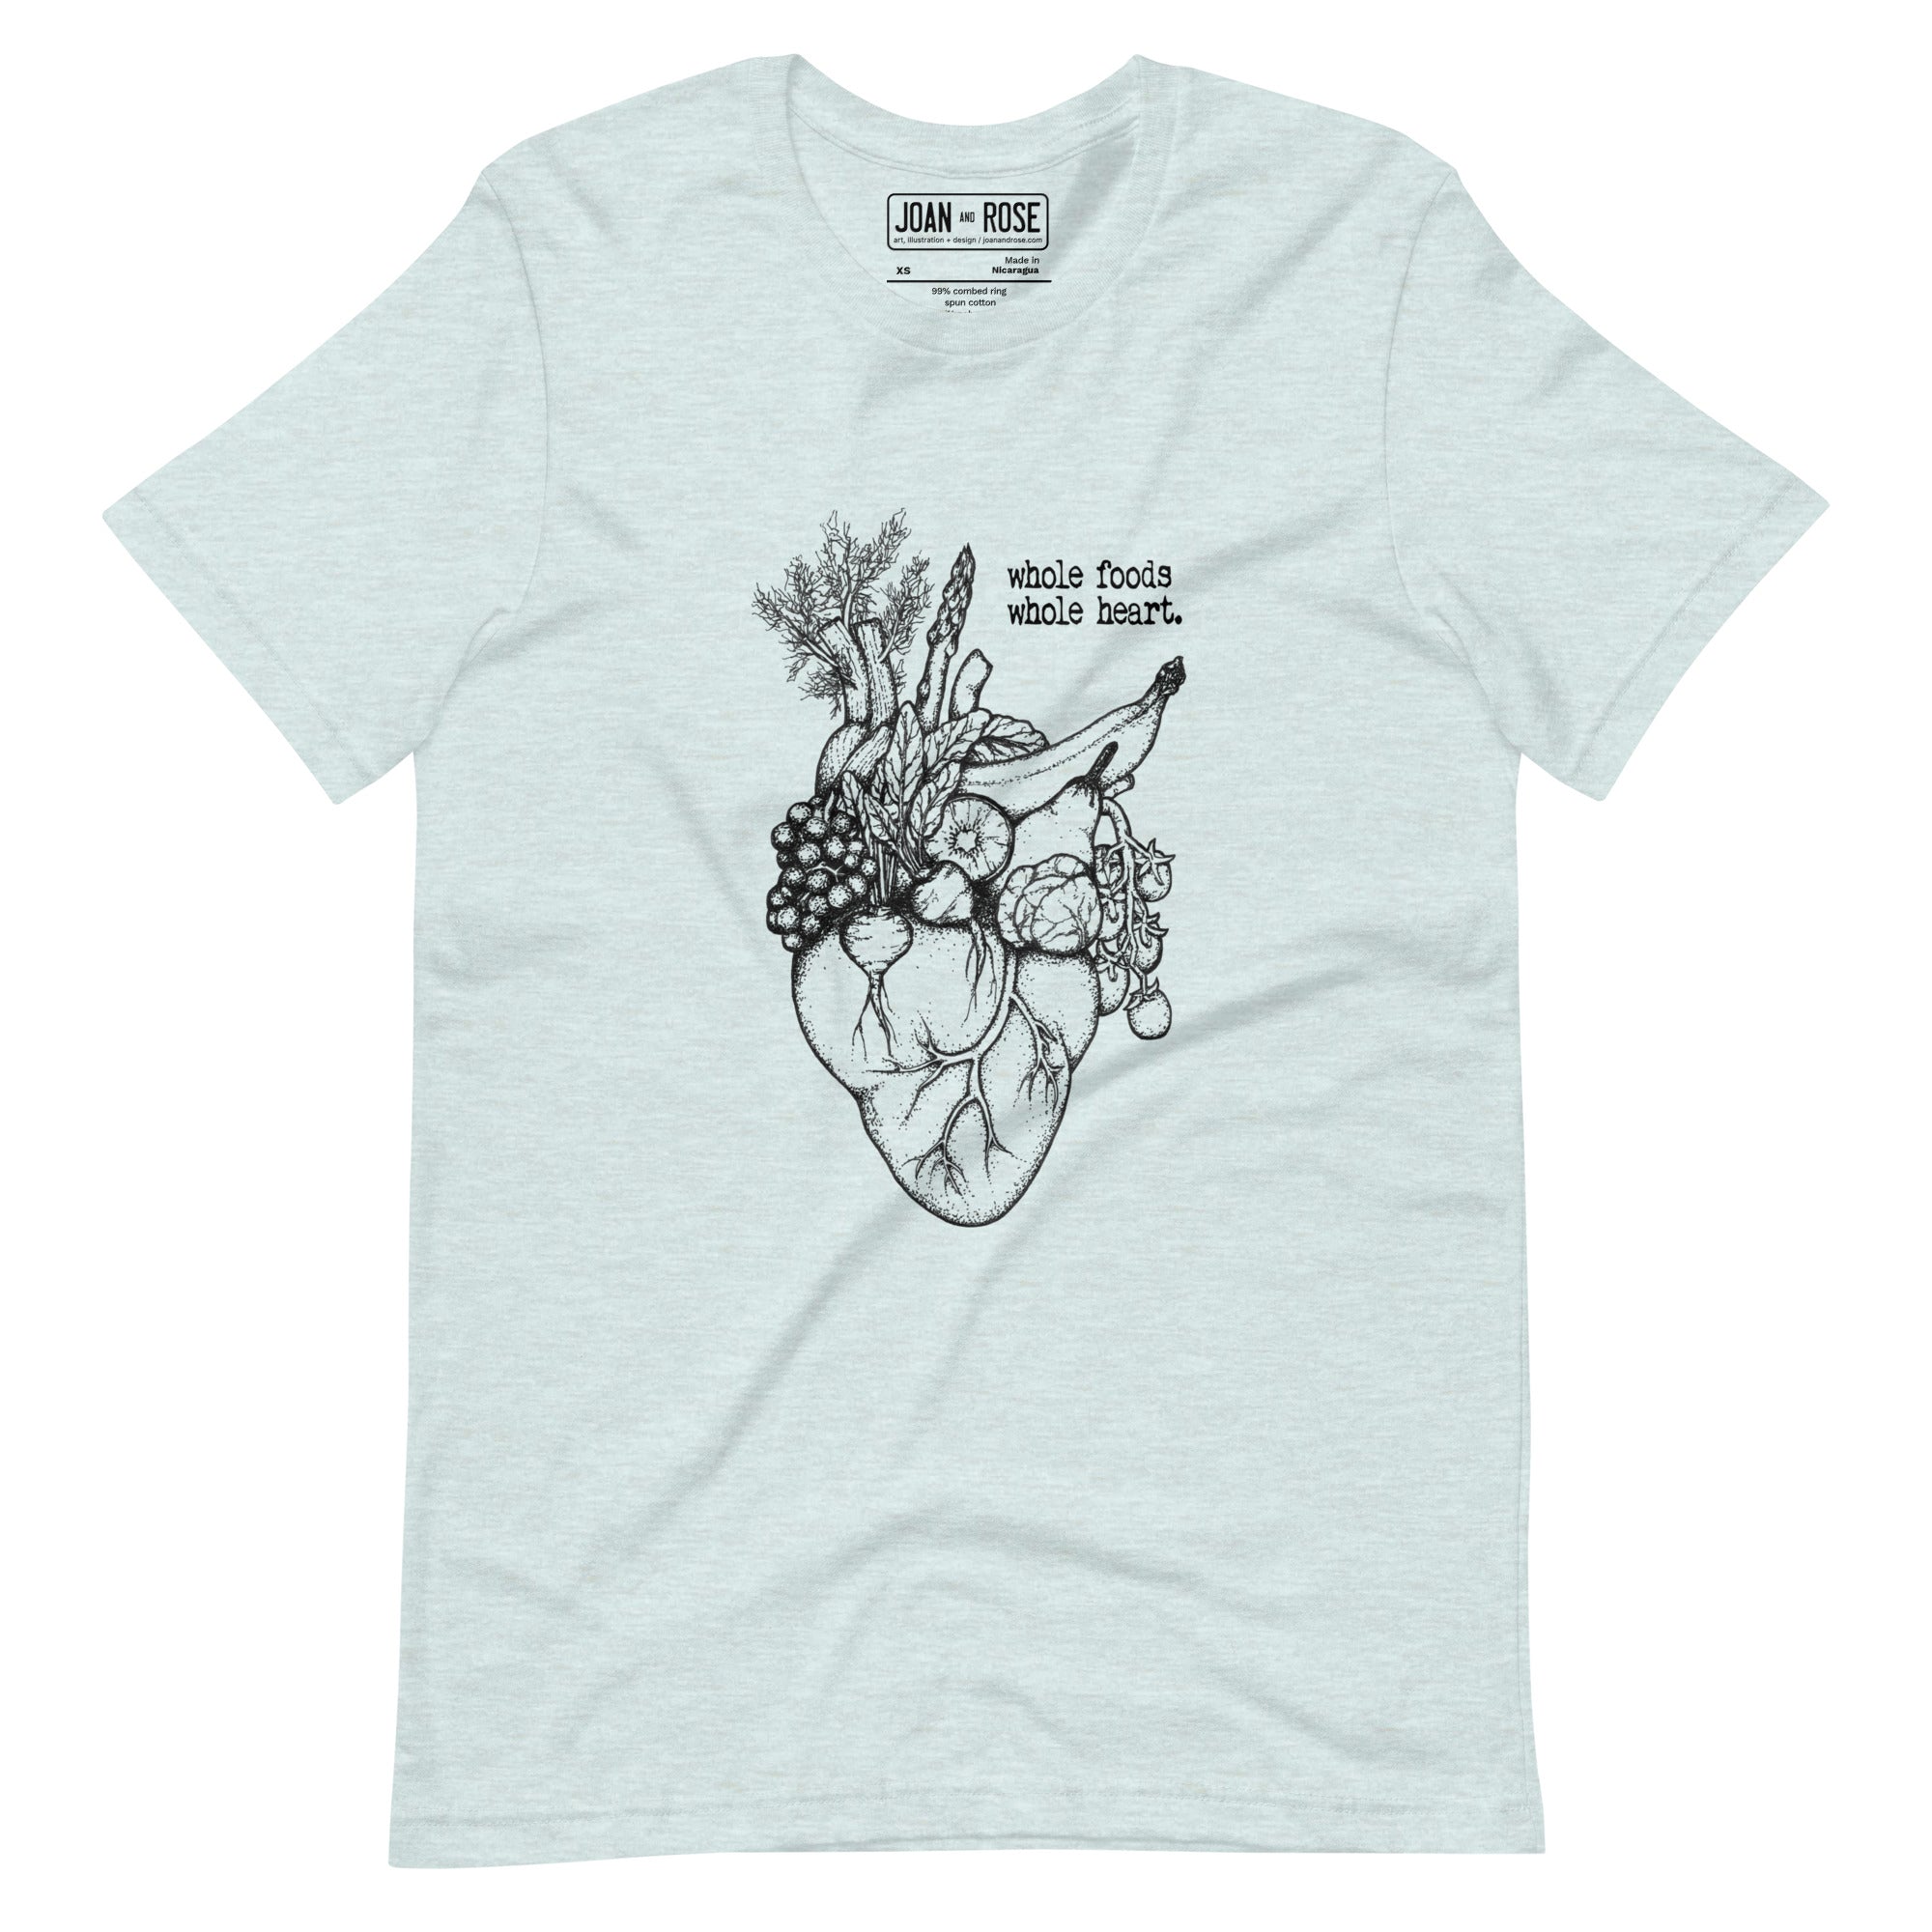 Heather ice blue version of Whole foods, Whole heart t-shirt